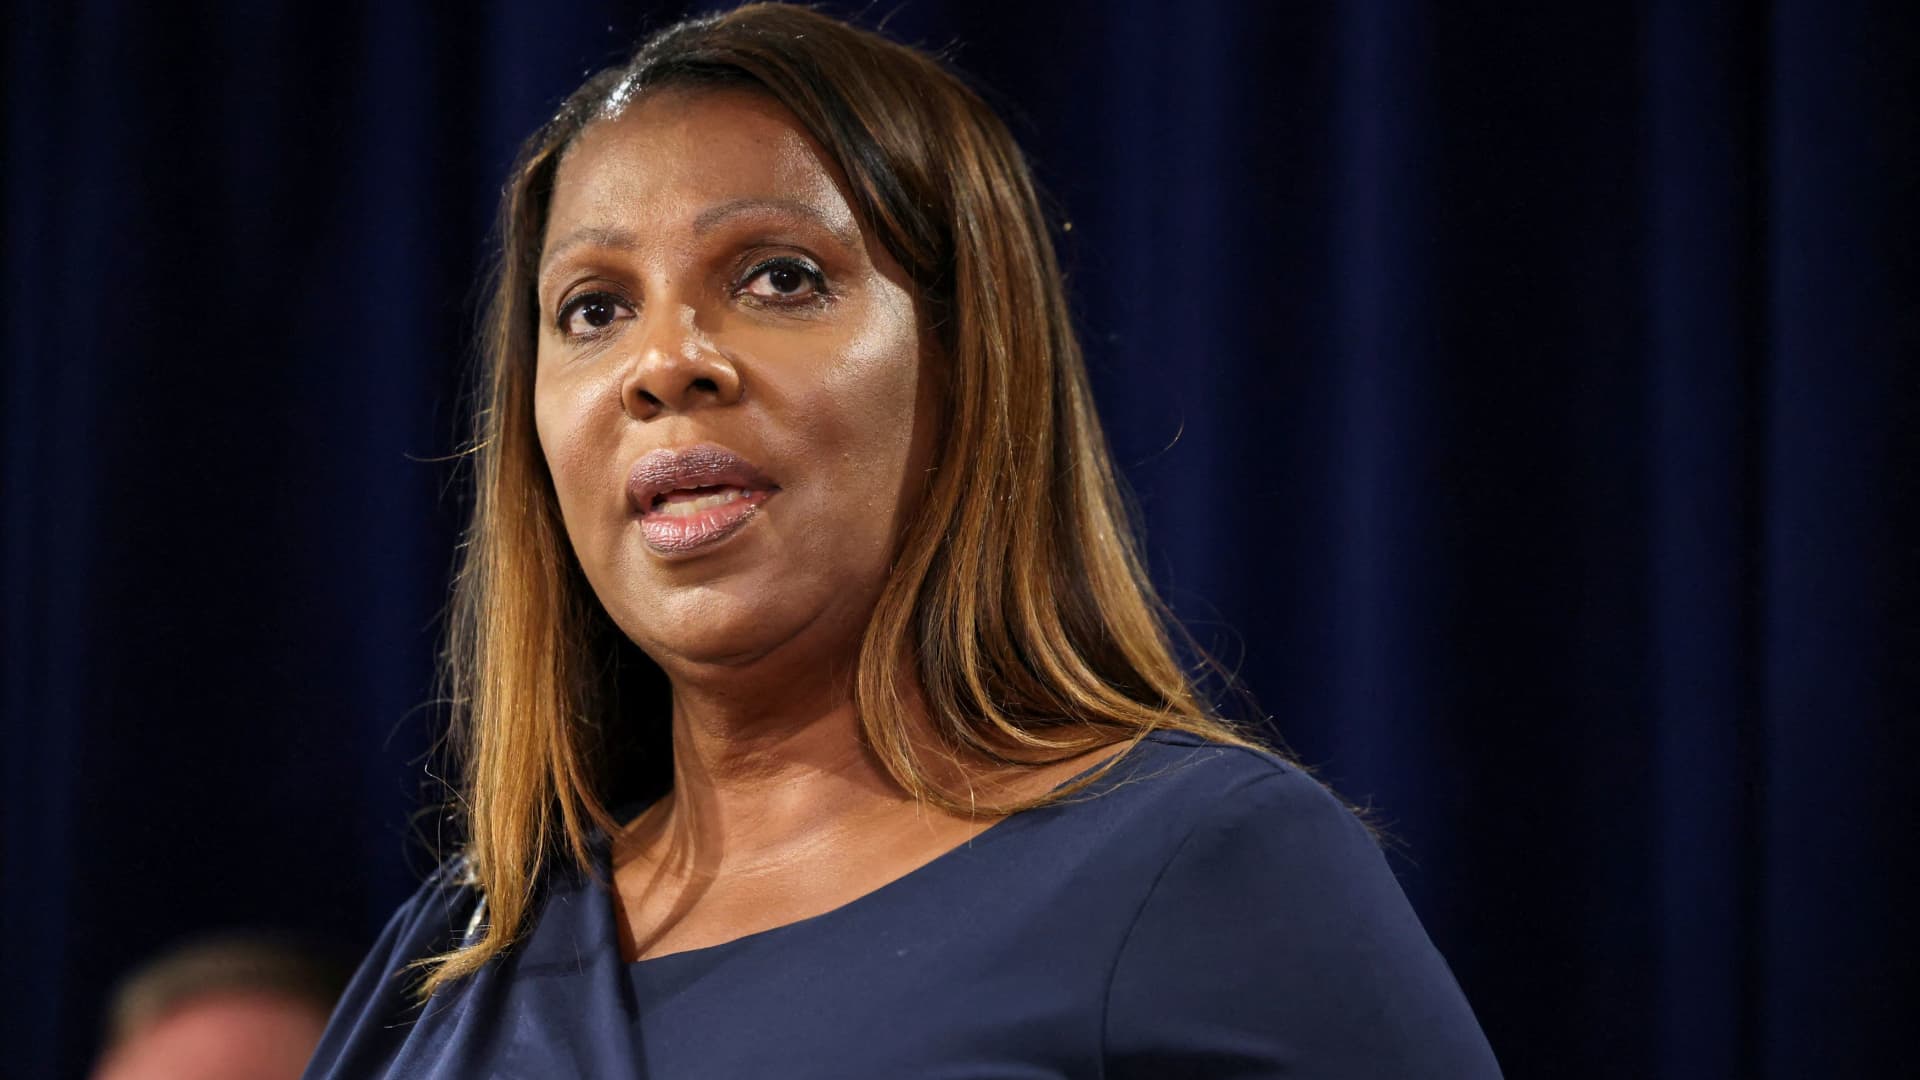 New York State Attorney General Letitia James speaks at a news conference after former U.S. President Donald Trump's White House chief strategist Steve Bannon arrived to surrender, in New York, September 8, 2022.